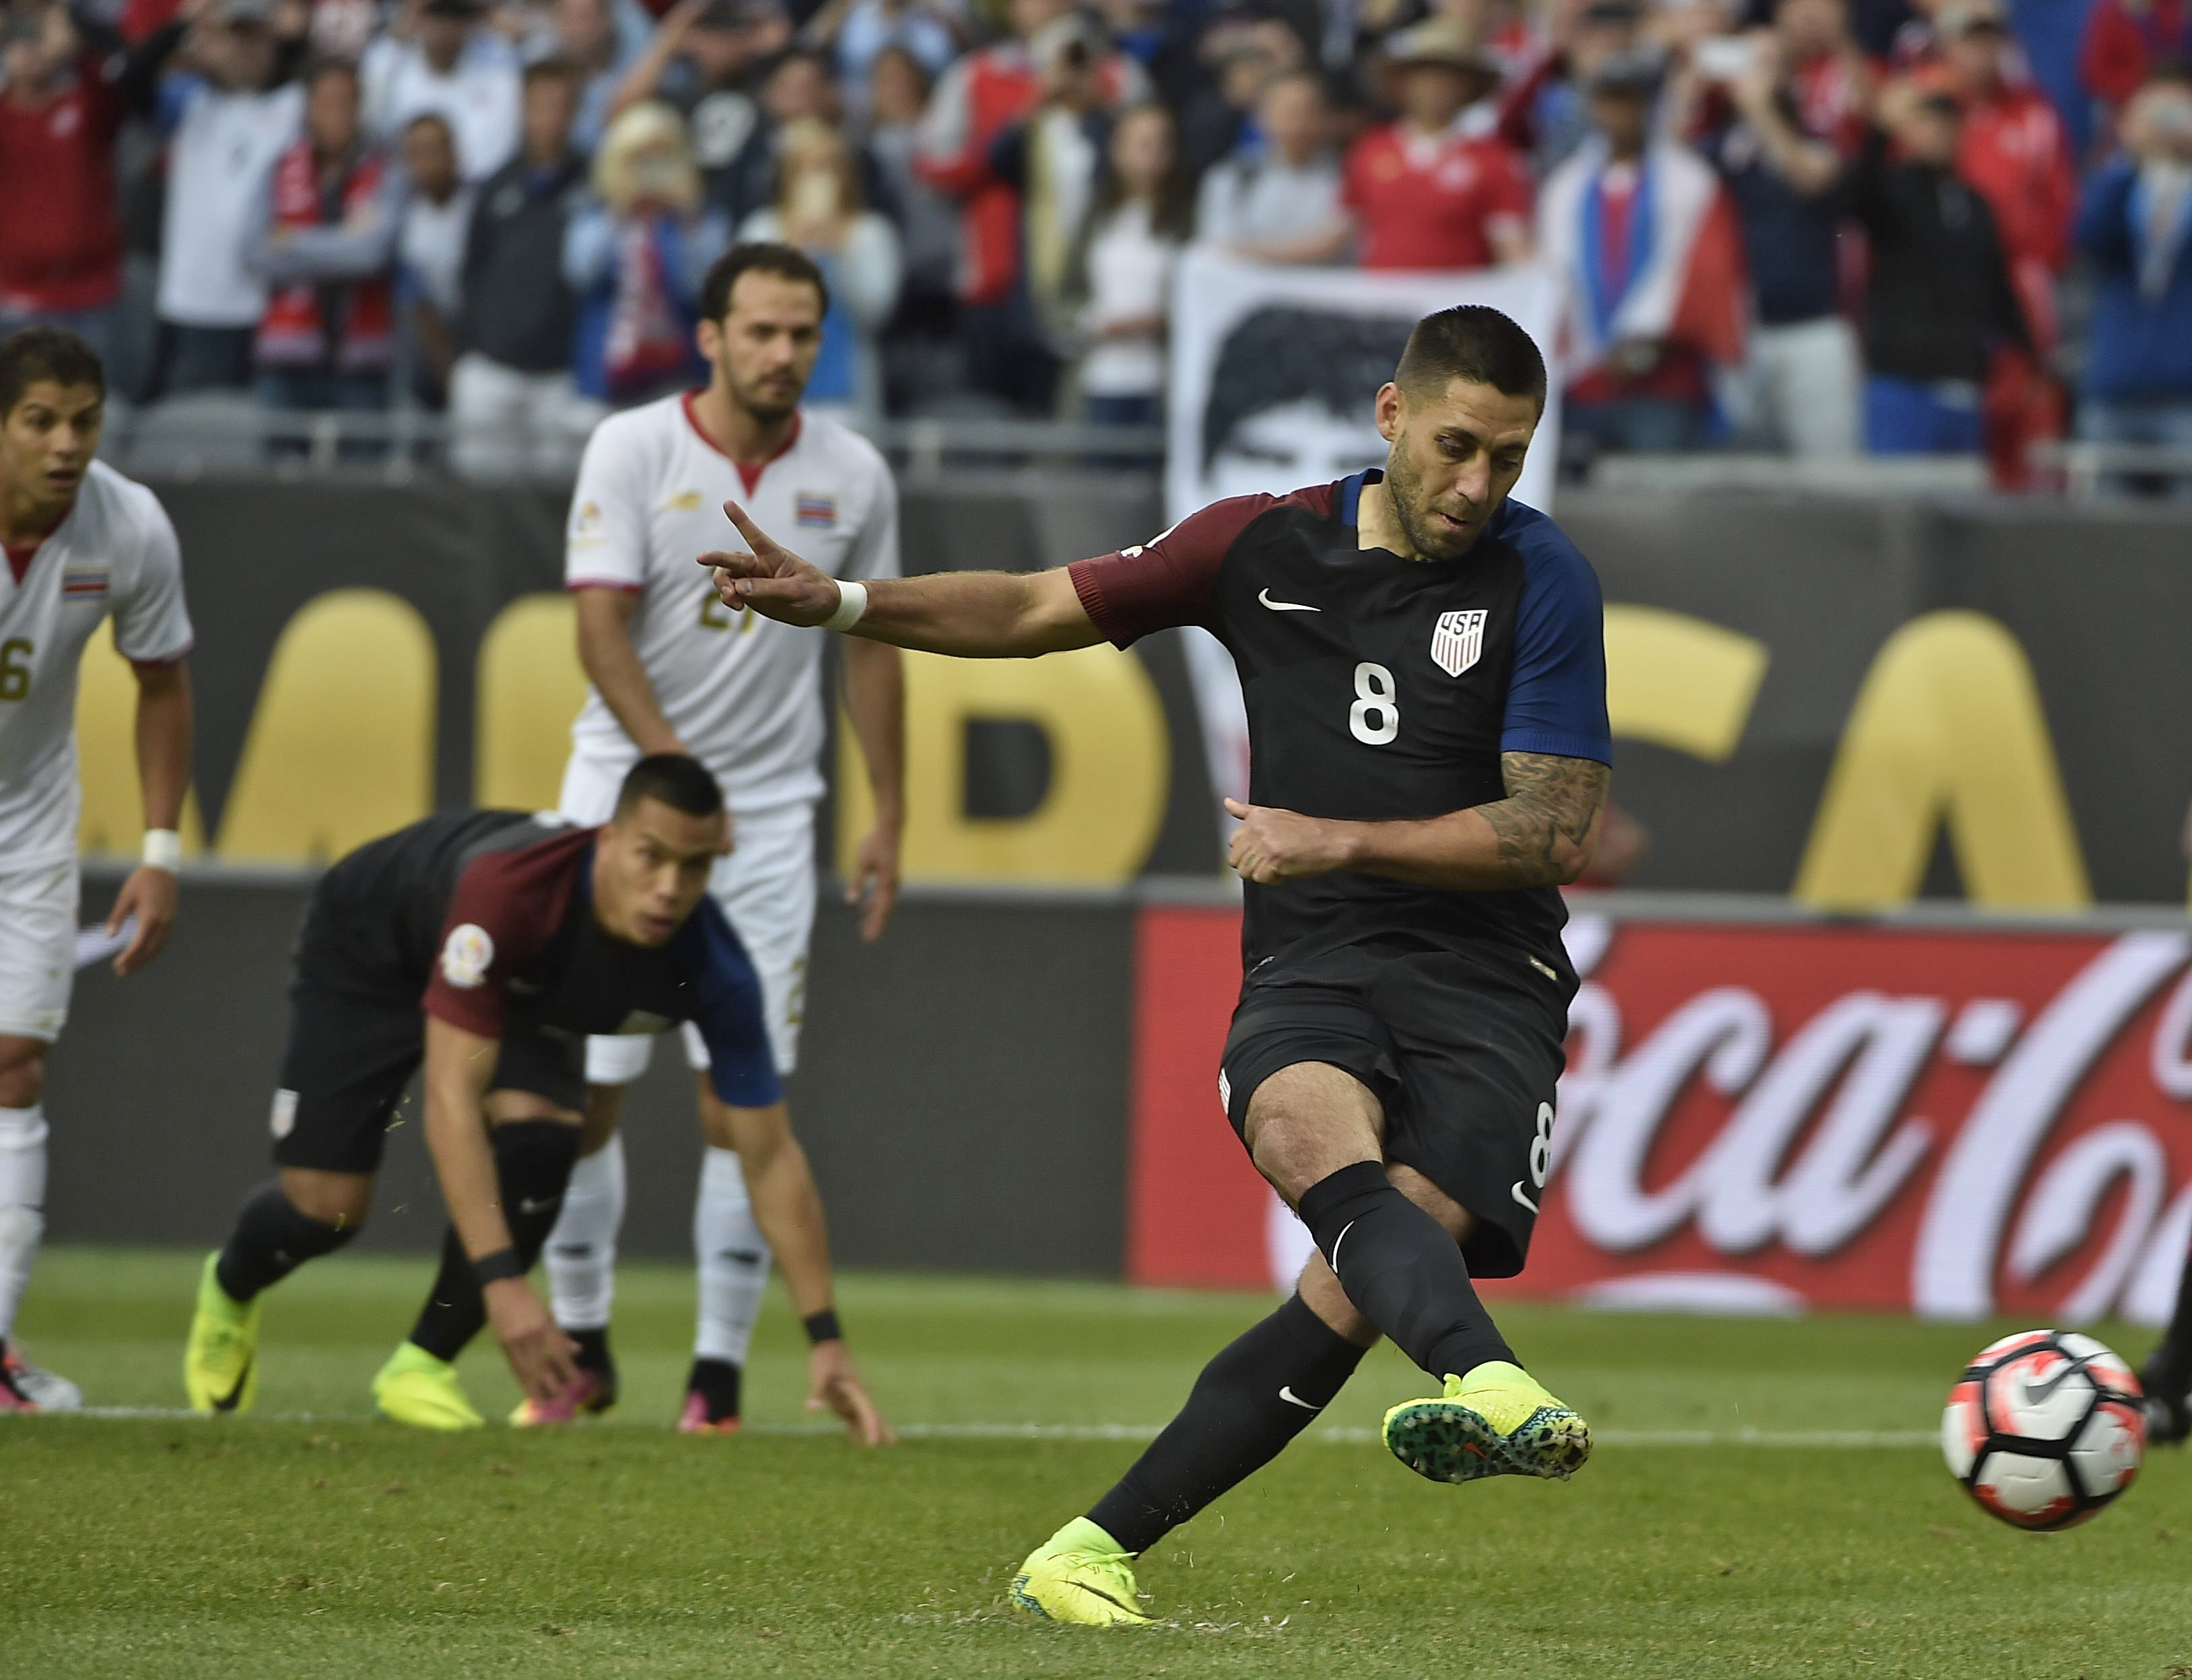 USA's Clint Dempsey shoots to score a penalty against Costa Rica during their Copa America Centenario football tournament in Chicago, Illinois, United States, on June 7, 2016.  / AFP / OMAR TORRES        (Photo credit should read OMAR TORRES/AFP/Getty Images)